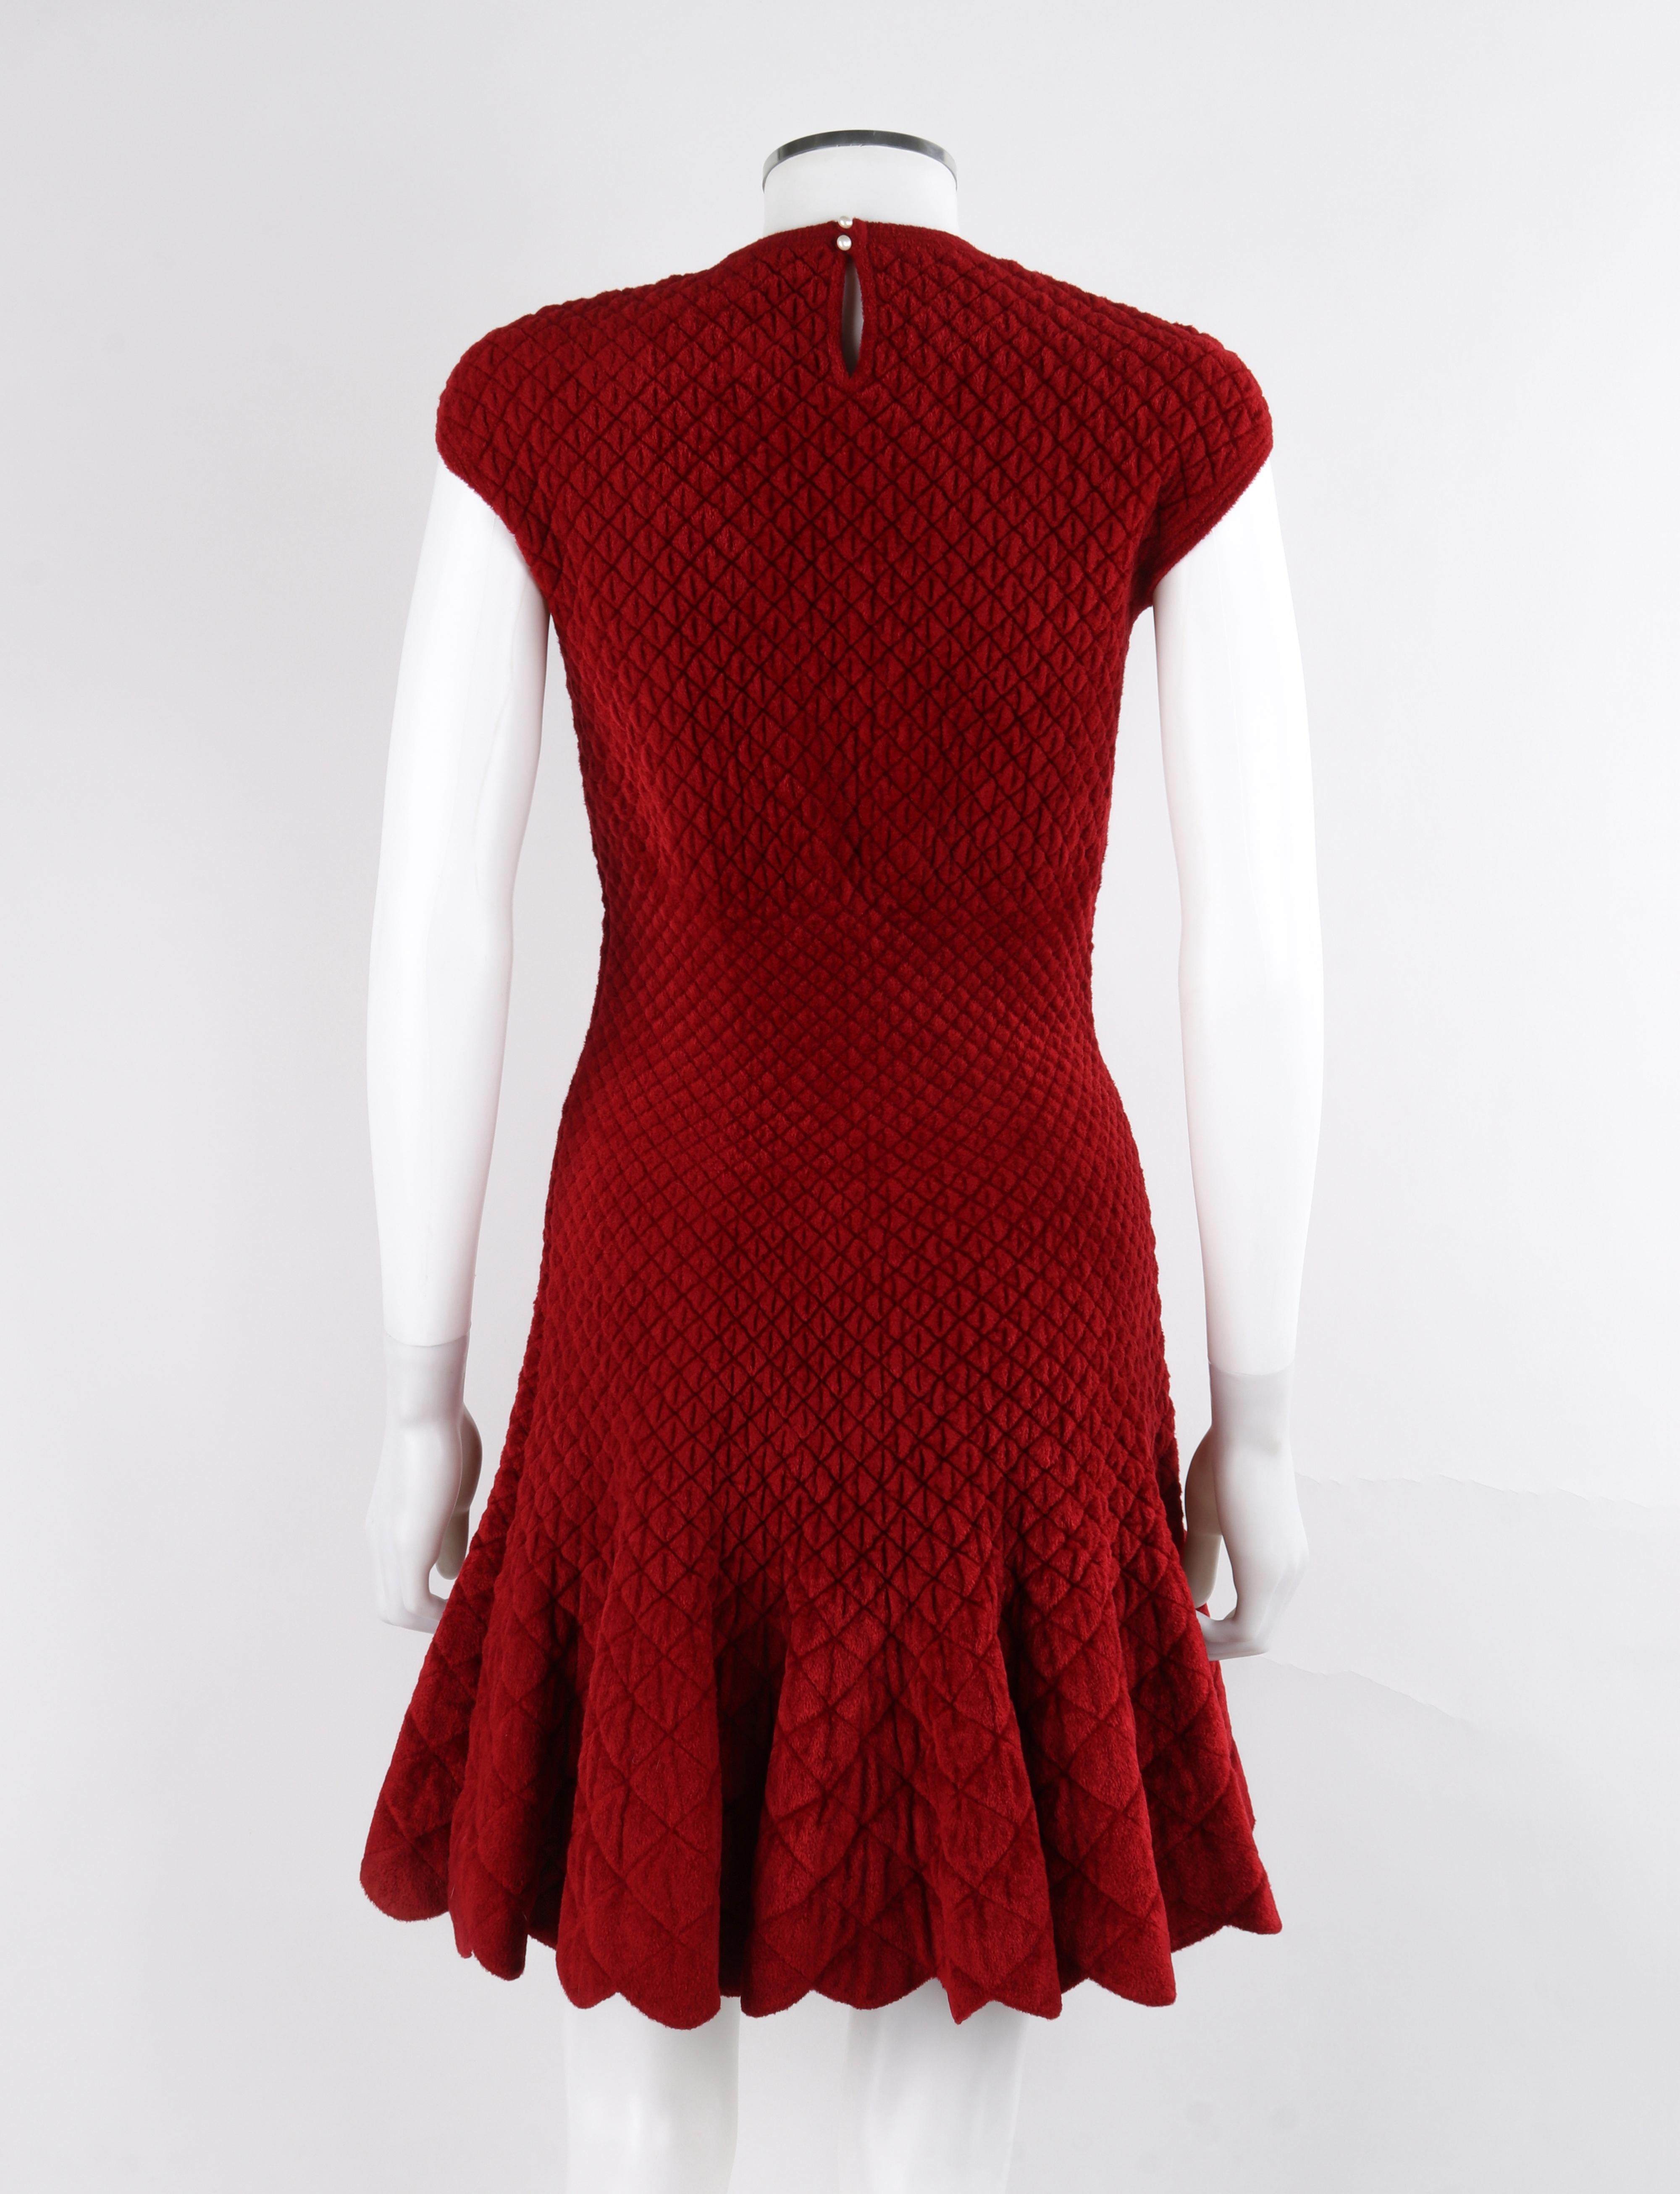 ALEXANDER McQUEEN c.2010's Red Wool Quilted Plush Sleeveless Fit & Flair Dress For Sale 1